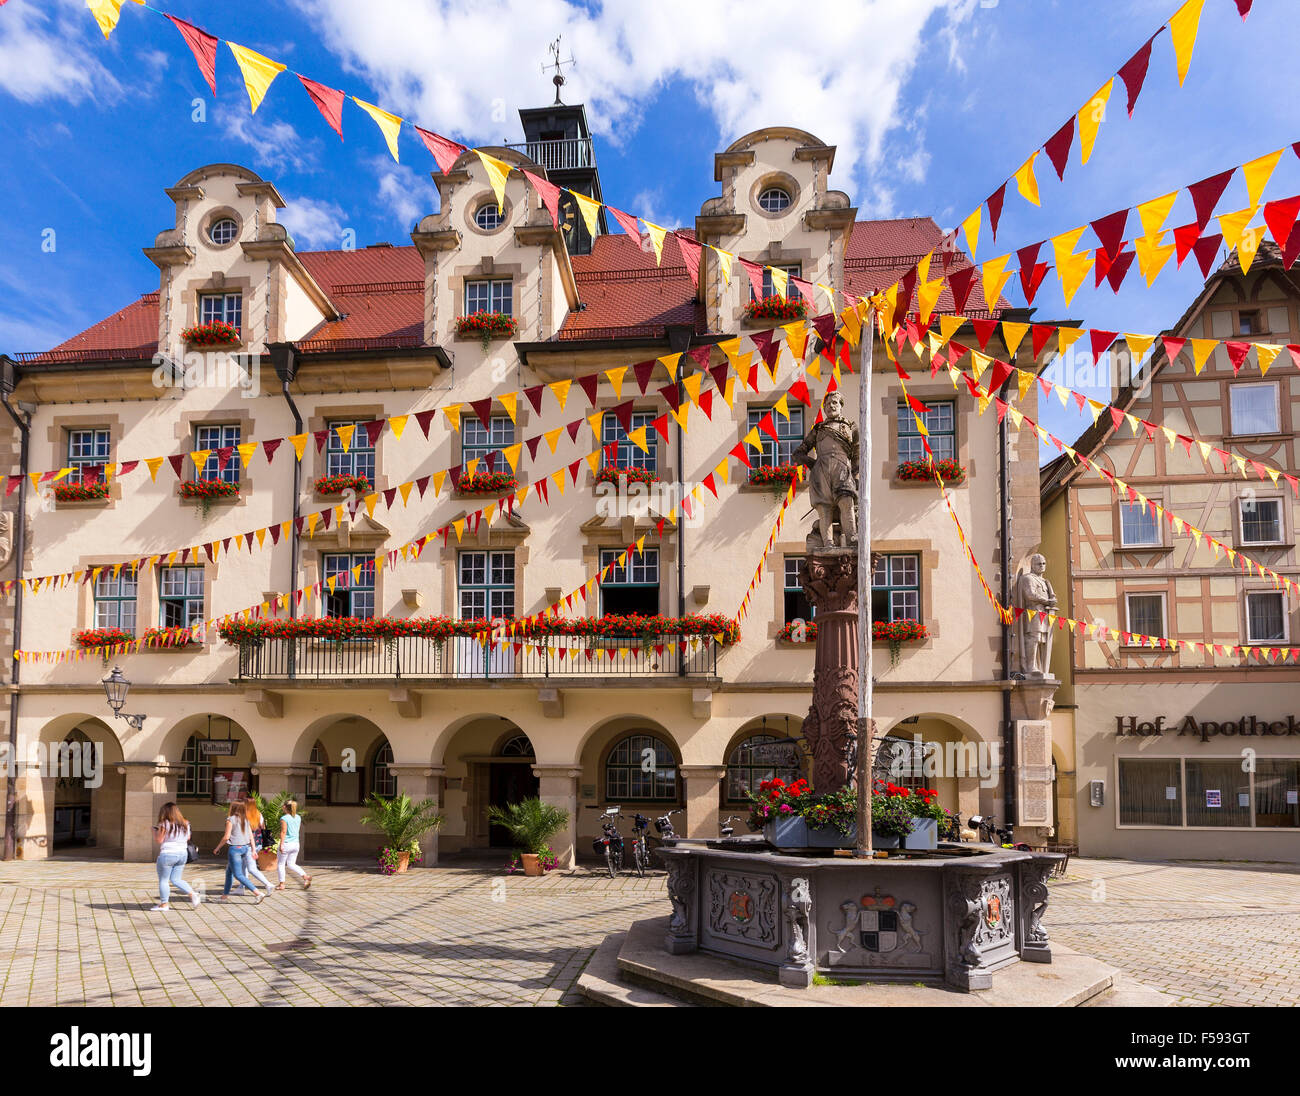 City hall and market fountain, historic centre, Sigmaringen, Baden-Württemberg, Germany Stock Photo